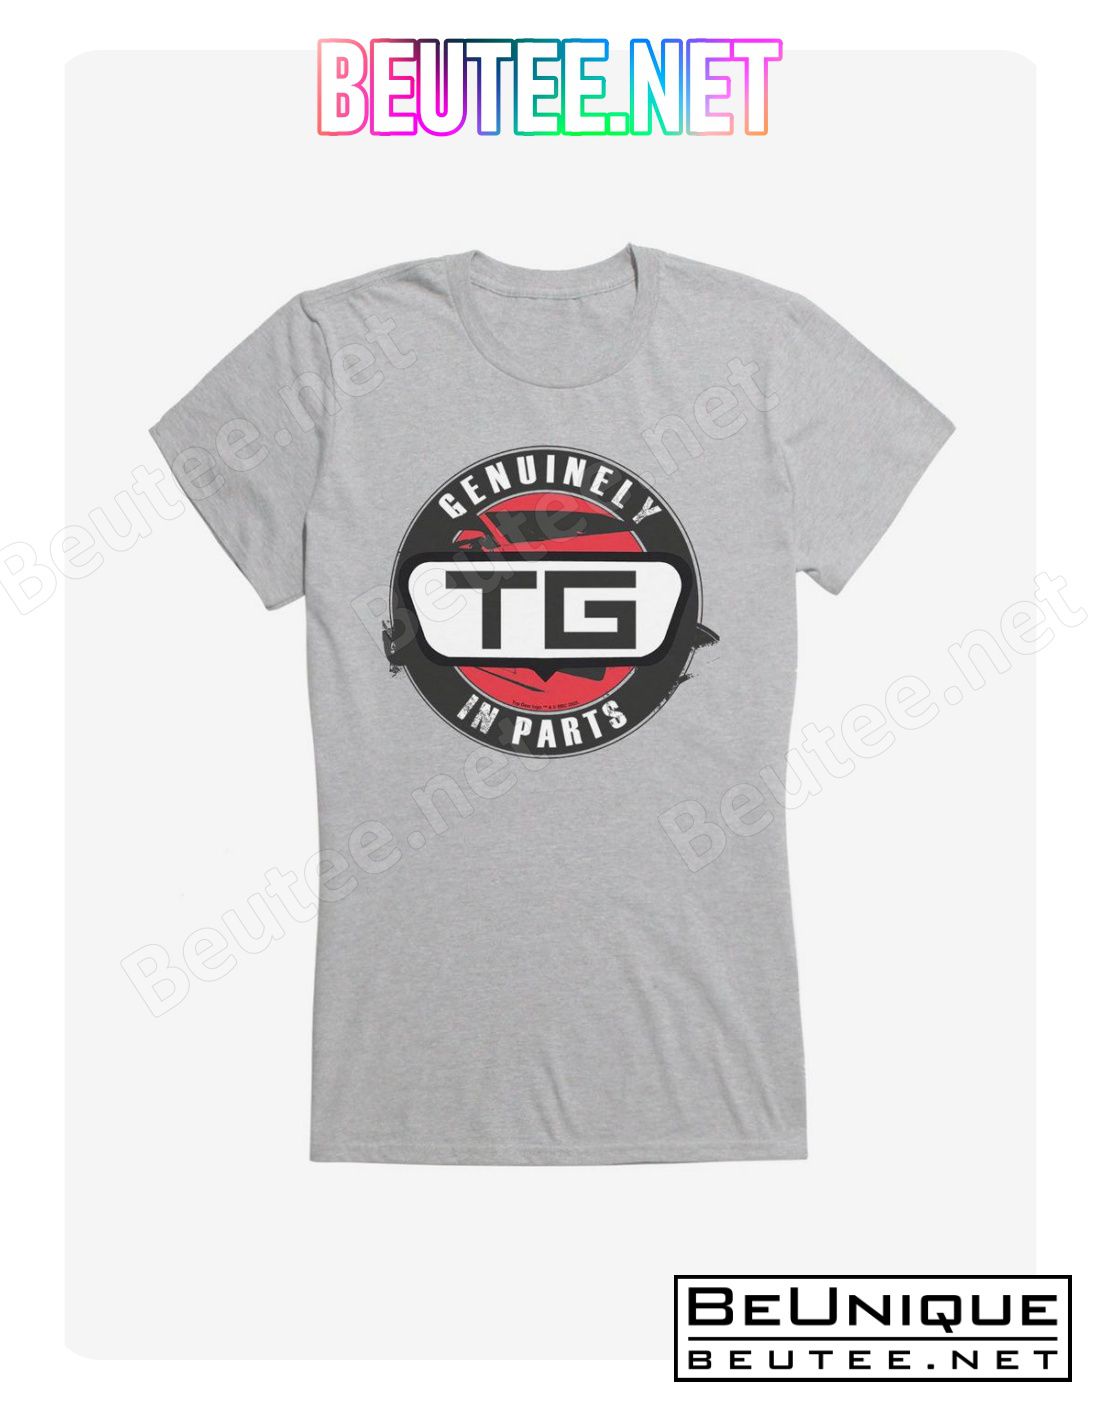 Top Gear Genuinely In Parts T-Shirt